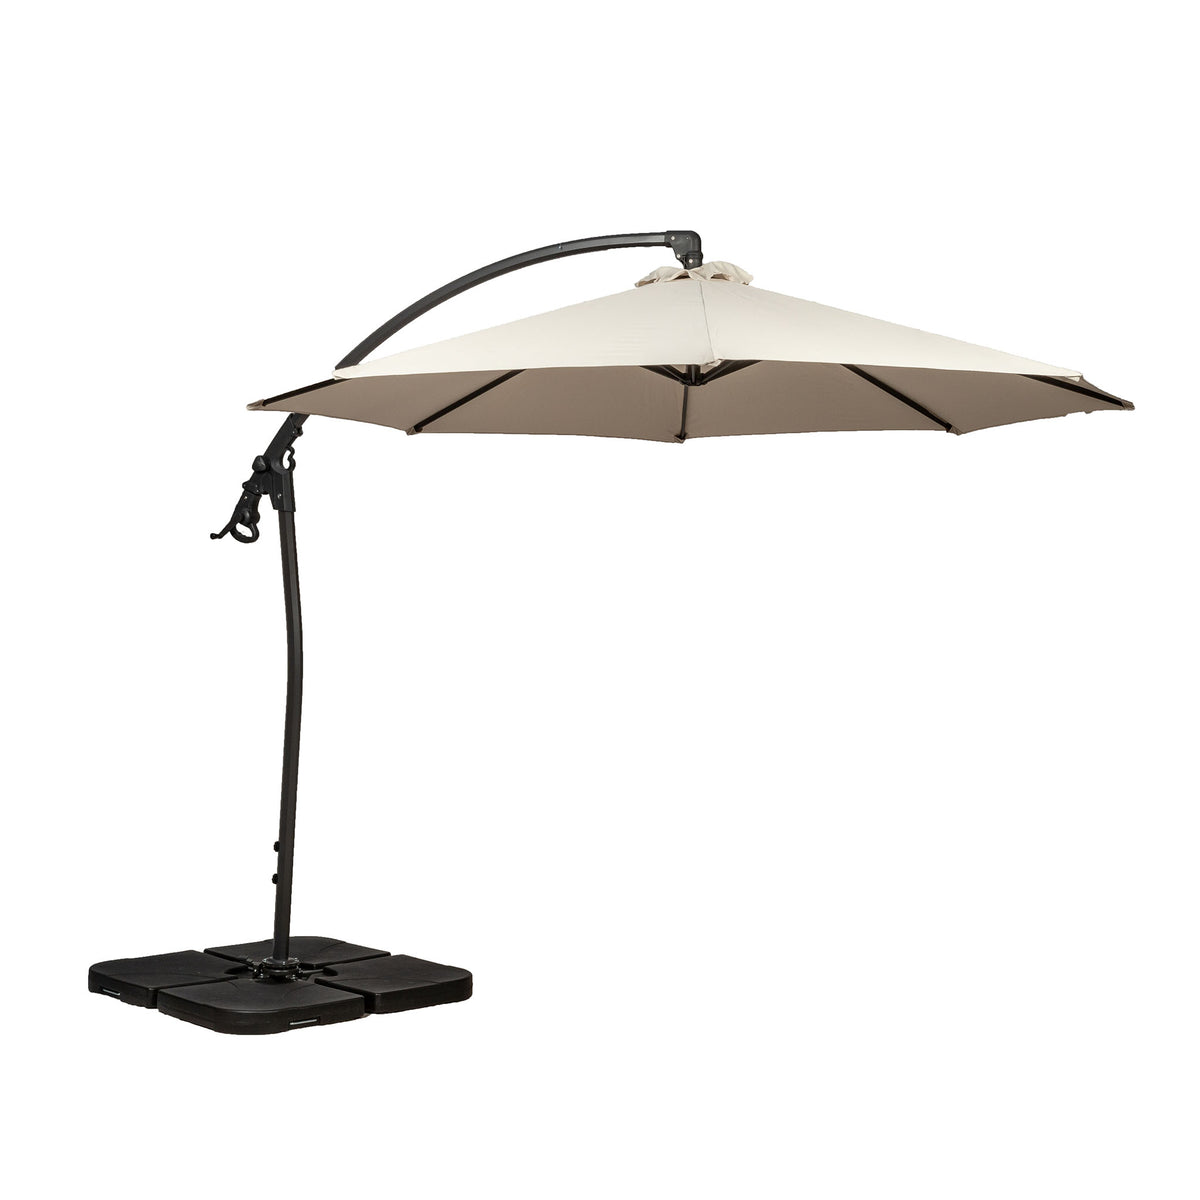 3m Deluxe Pedal Operated Cantilever Parasol - Ivory